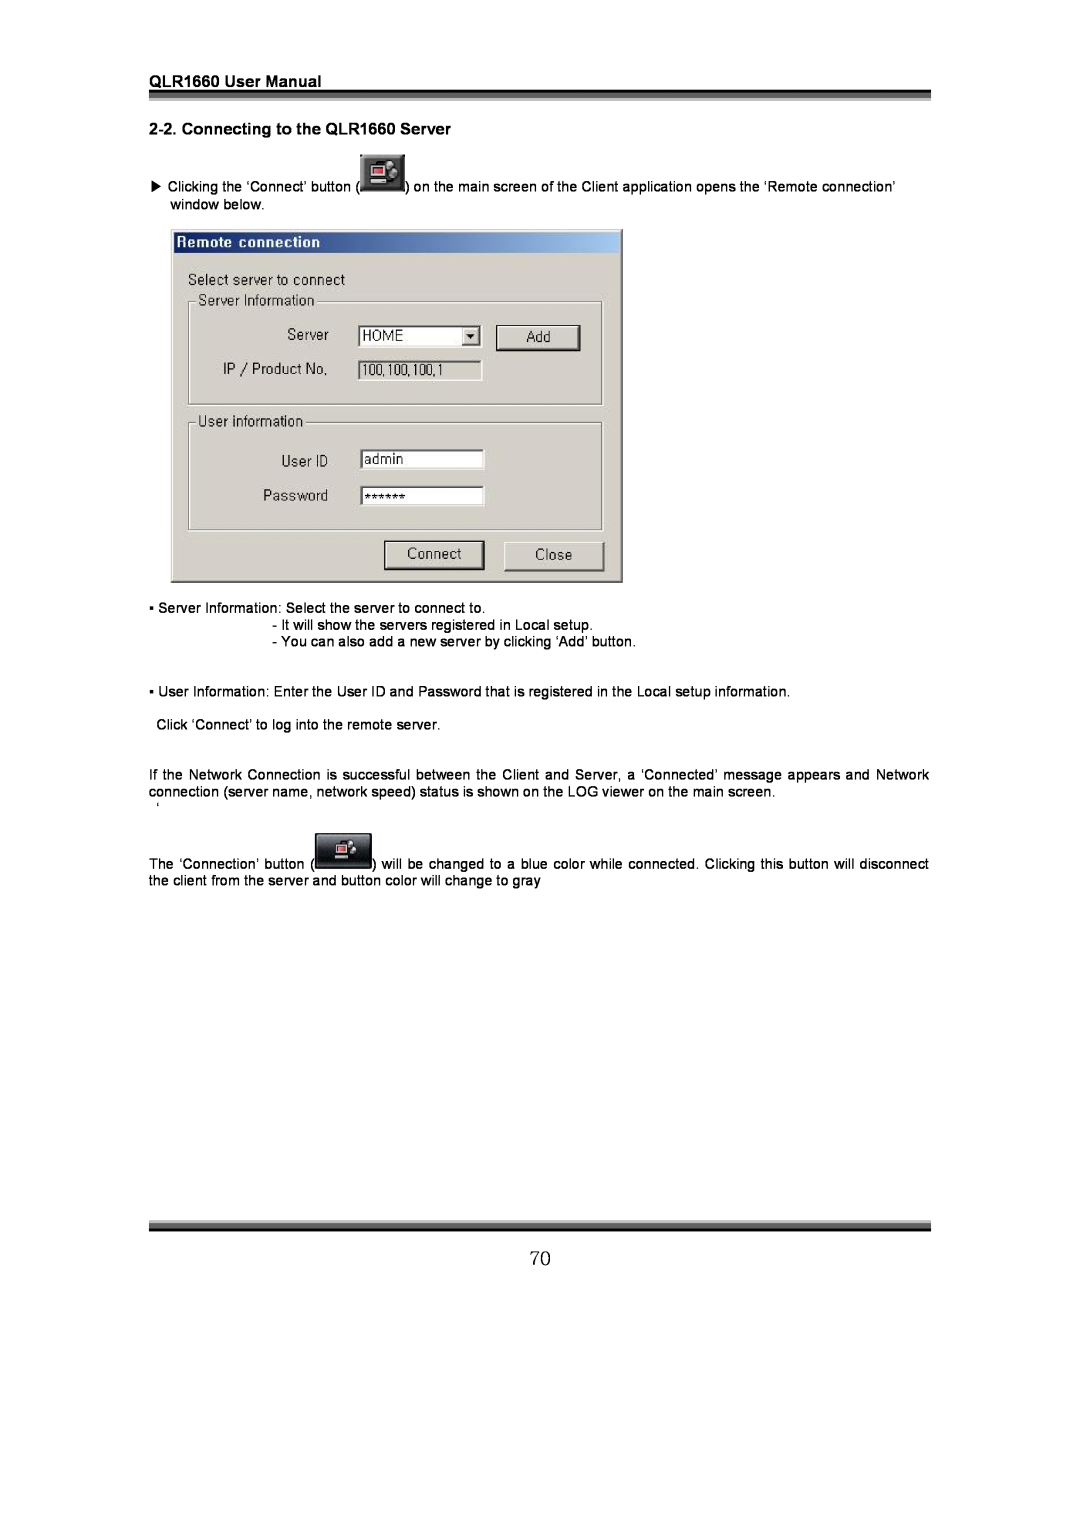 LOREX Technology instruction manual Connecting to the QLR1660 Server, QLR1660 User Manual 